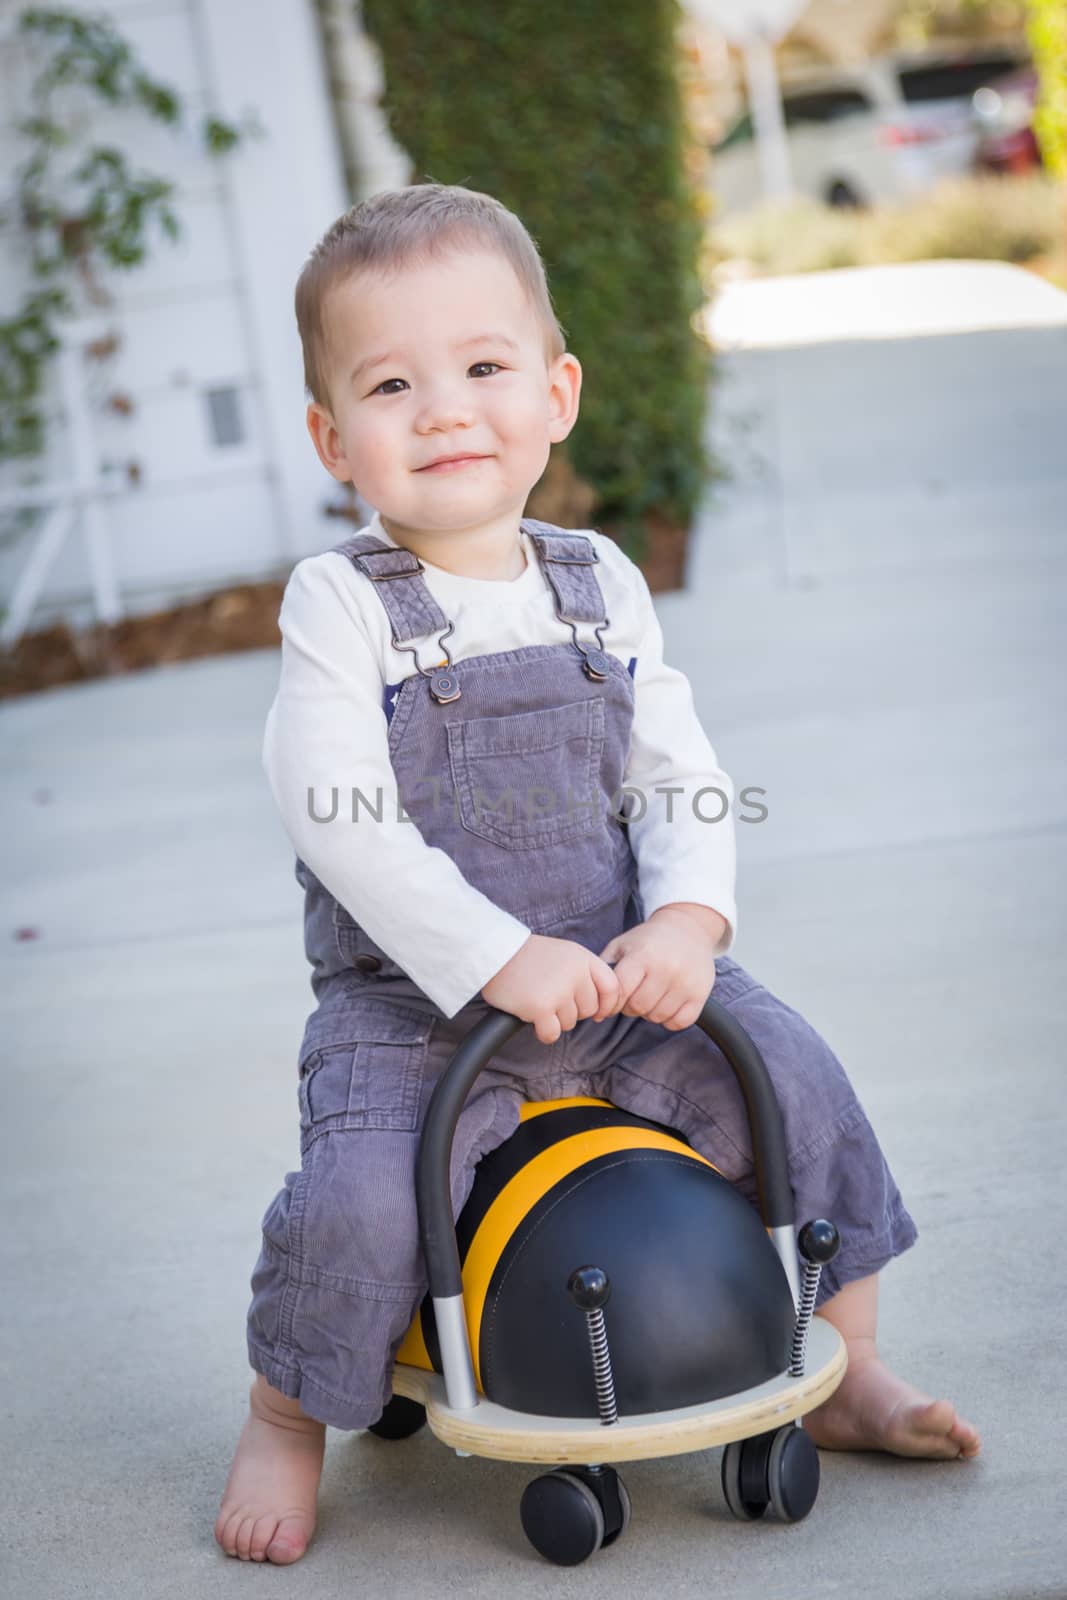 Young Mixed Race Chinese and Caucasian Baby Boy Having Fun Outdoors by Feverpitched